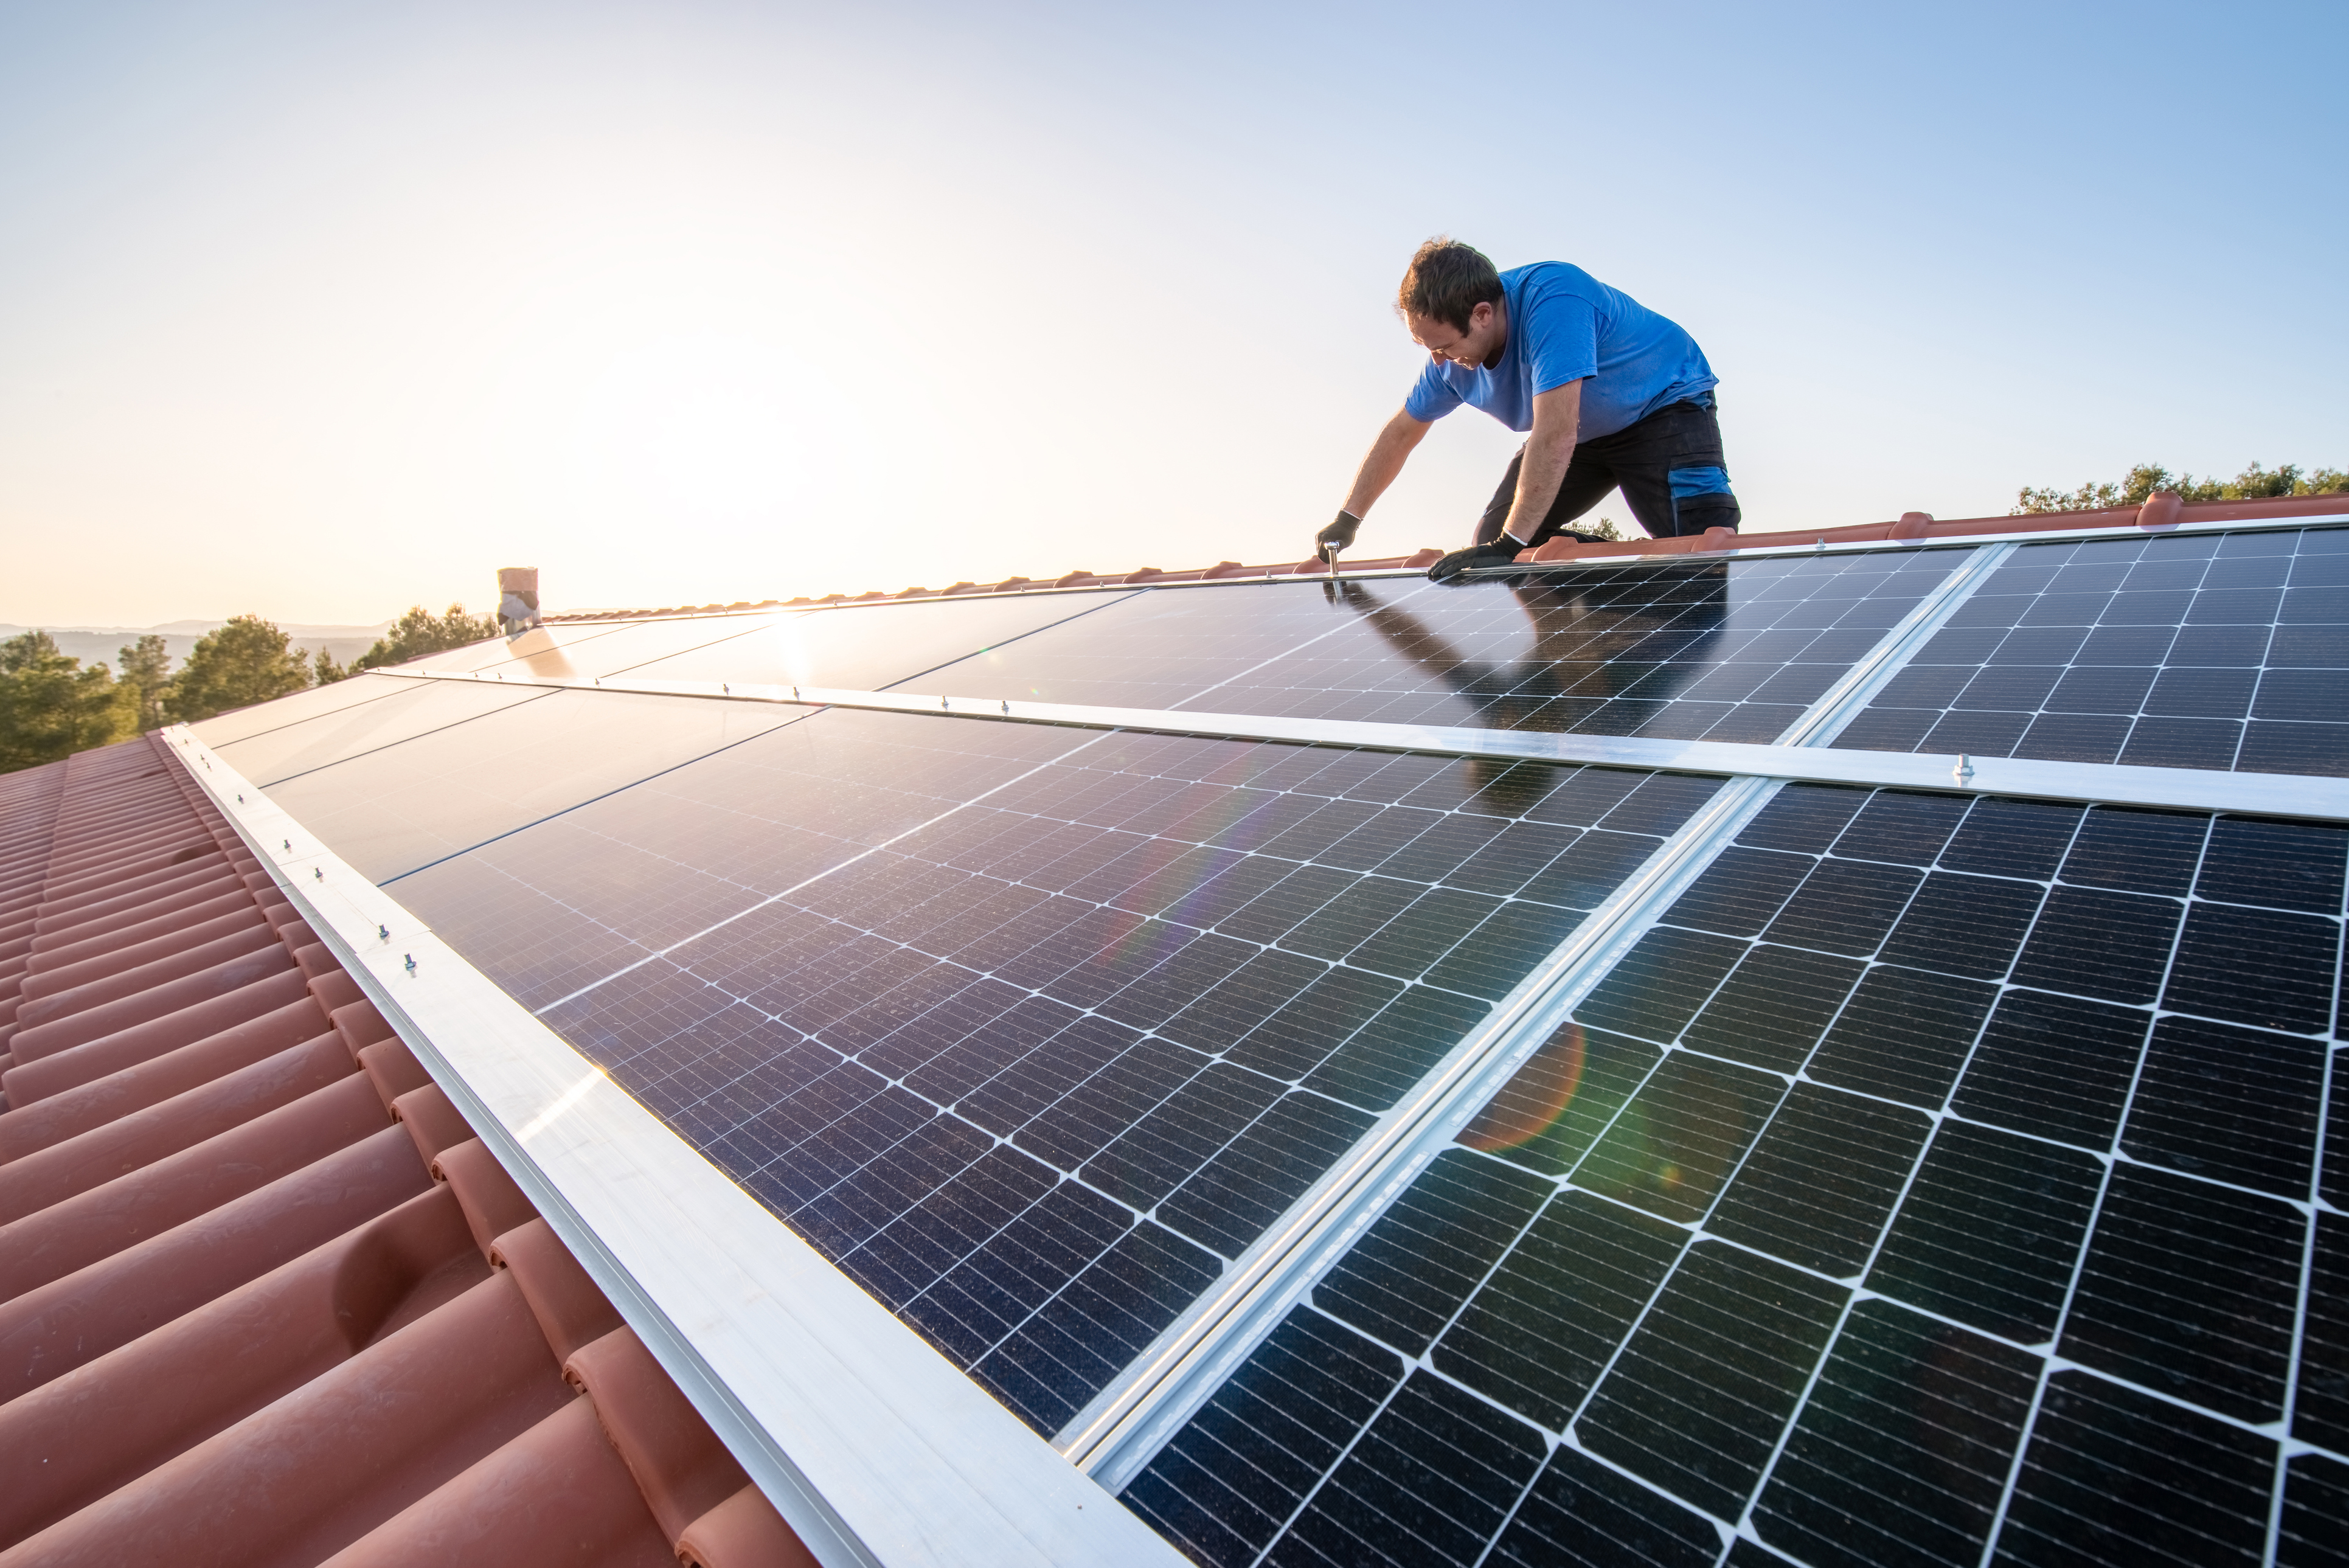 How Your Smart Meter Helps Your Solar Panels Communicate With the